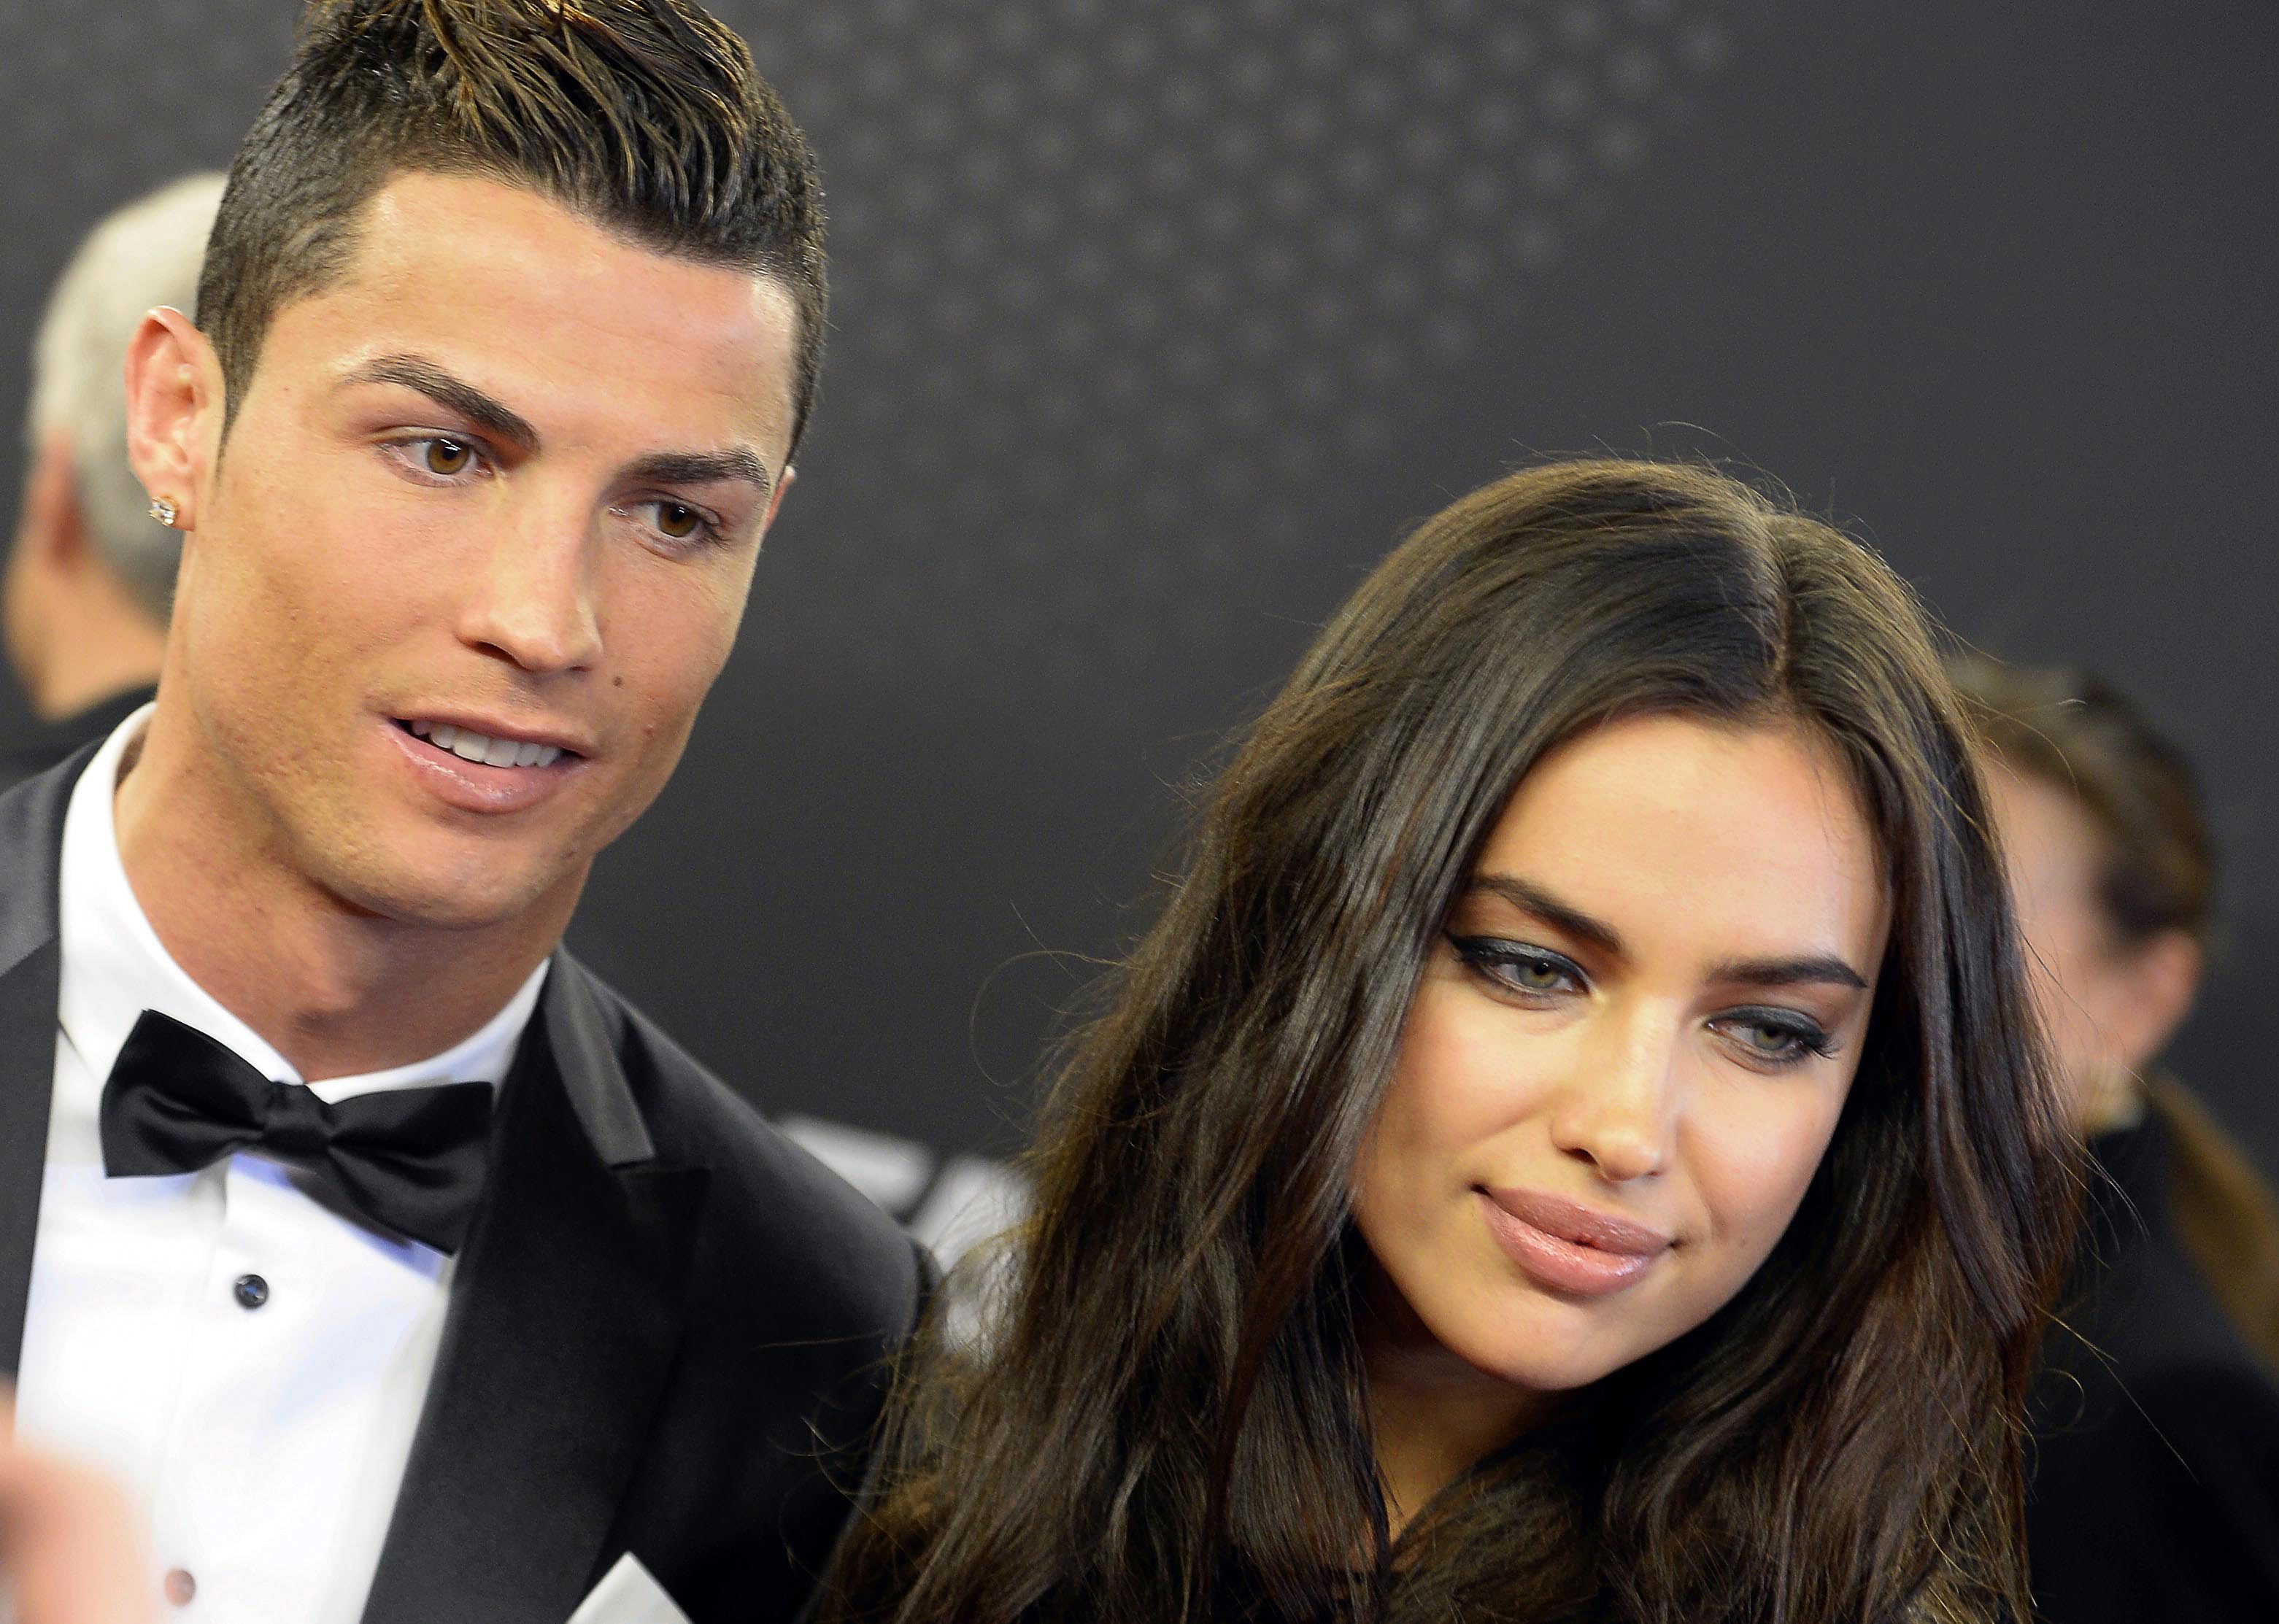 2014-01-13 14:21:01 epa04019215 Real Madrid's Portuguese striker Cristiano Ronaldo (L), one of the nominees of the FIFA Men's World Player of the Year Award, arrives with his wife, russian model Irina Shayk (R) on the red carpet prior to the FIFA Ballon d'Or 2013 gala at the Kongresshaus in Zurich, Switzerland, 13 January 2014. EPA/WALTER BIERI